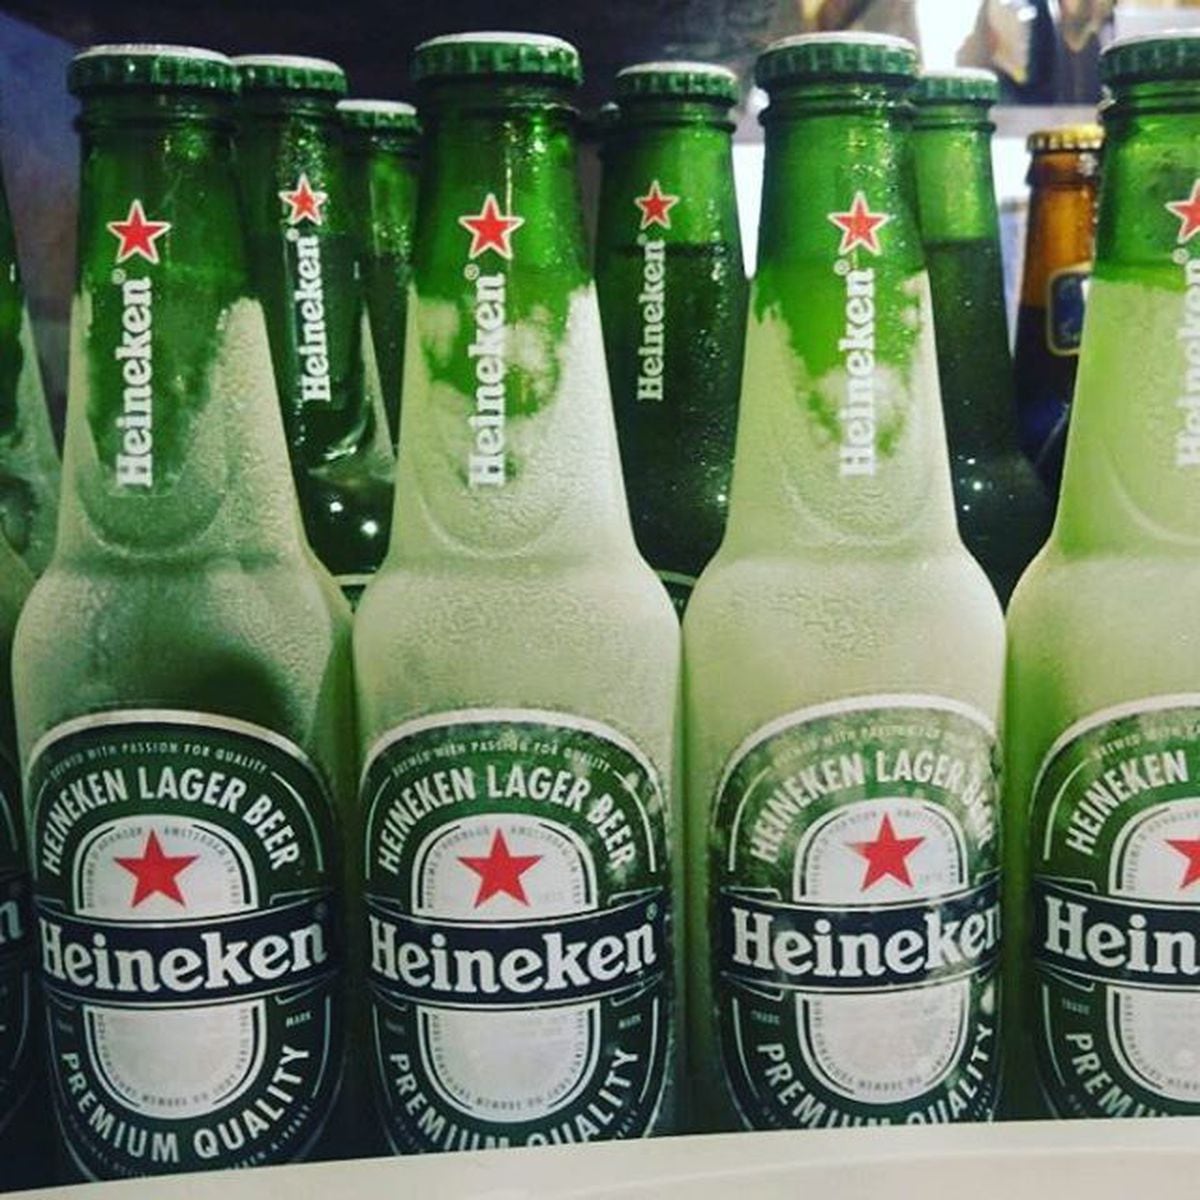 Free Heineken on offer at Marston's pubs across Shropshire thanks to an offer being run by FANZO. Photo: FANZO